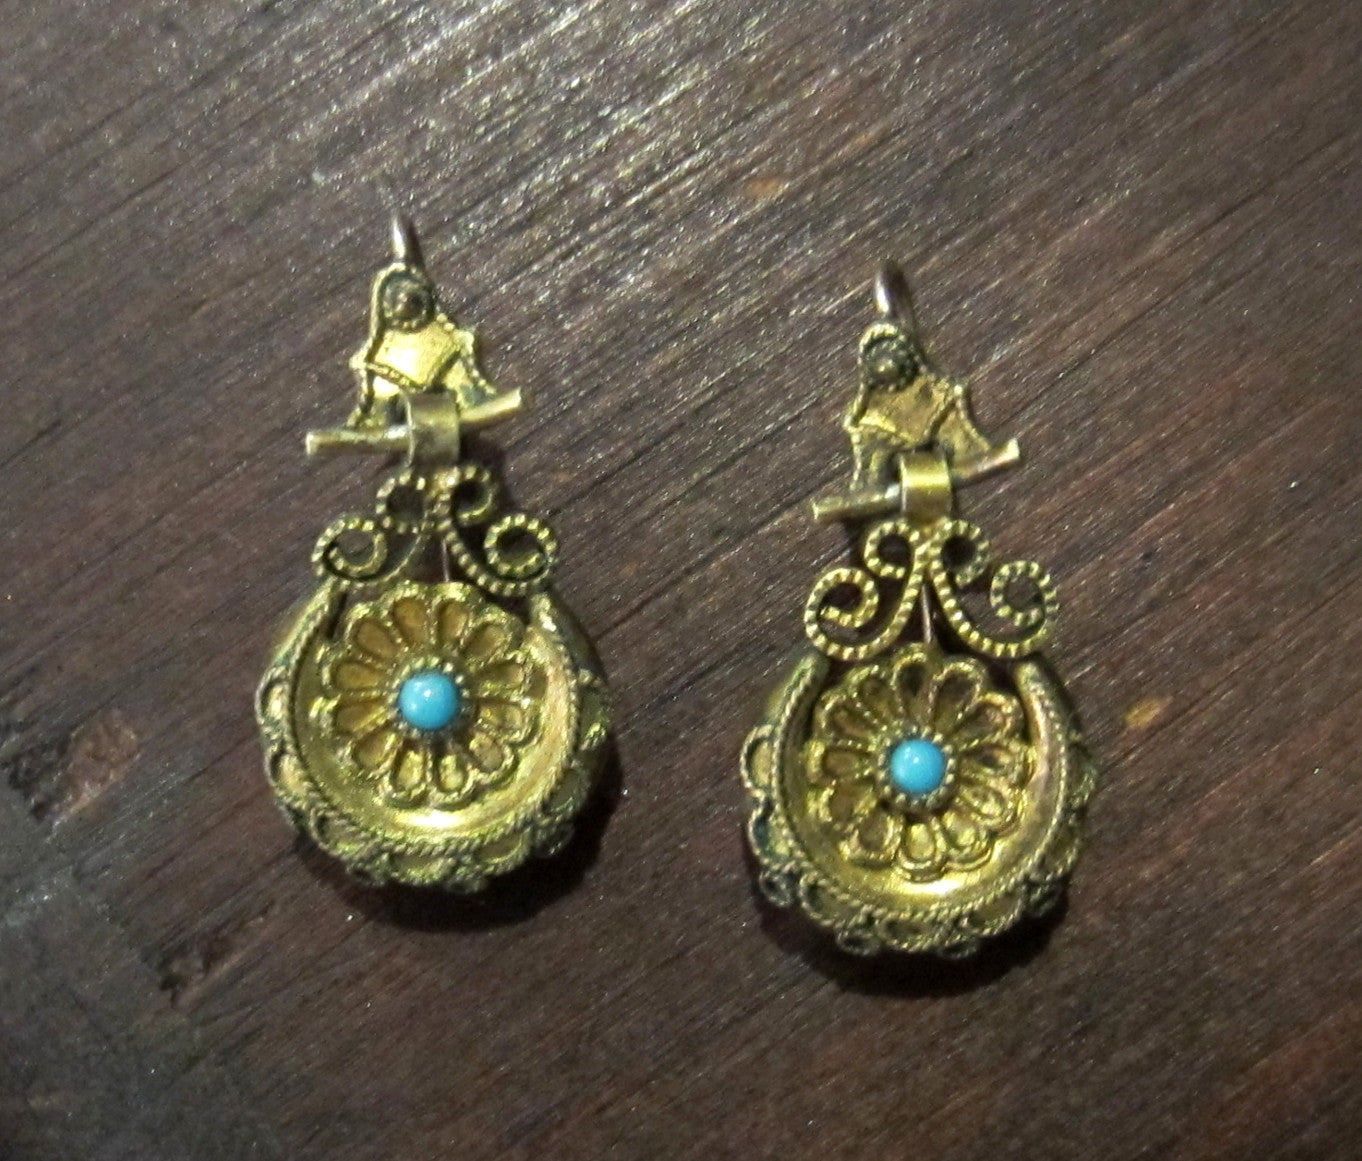 Victorian Turquoise Drop Earrings Gold-filled c. 1880 | Bavier Brook ...